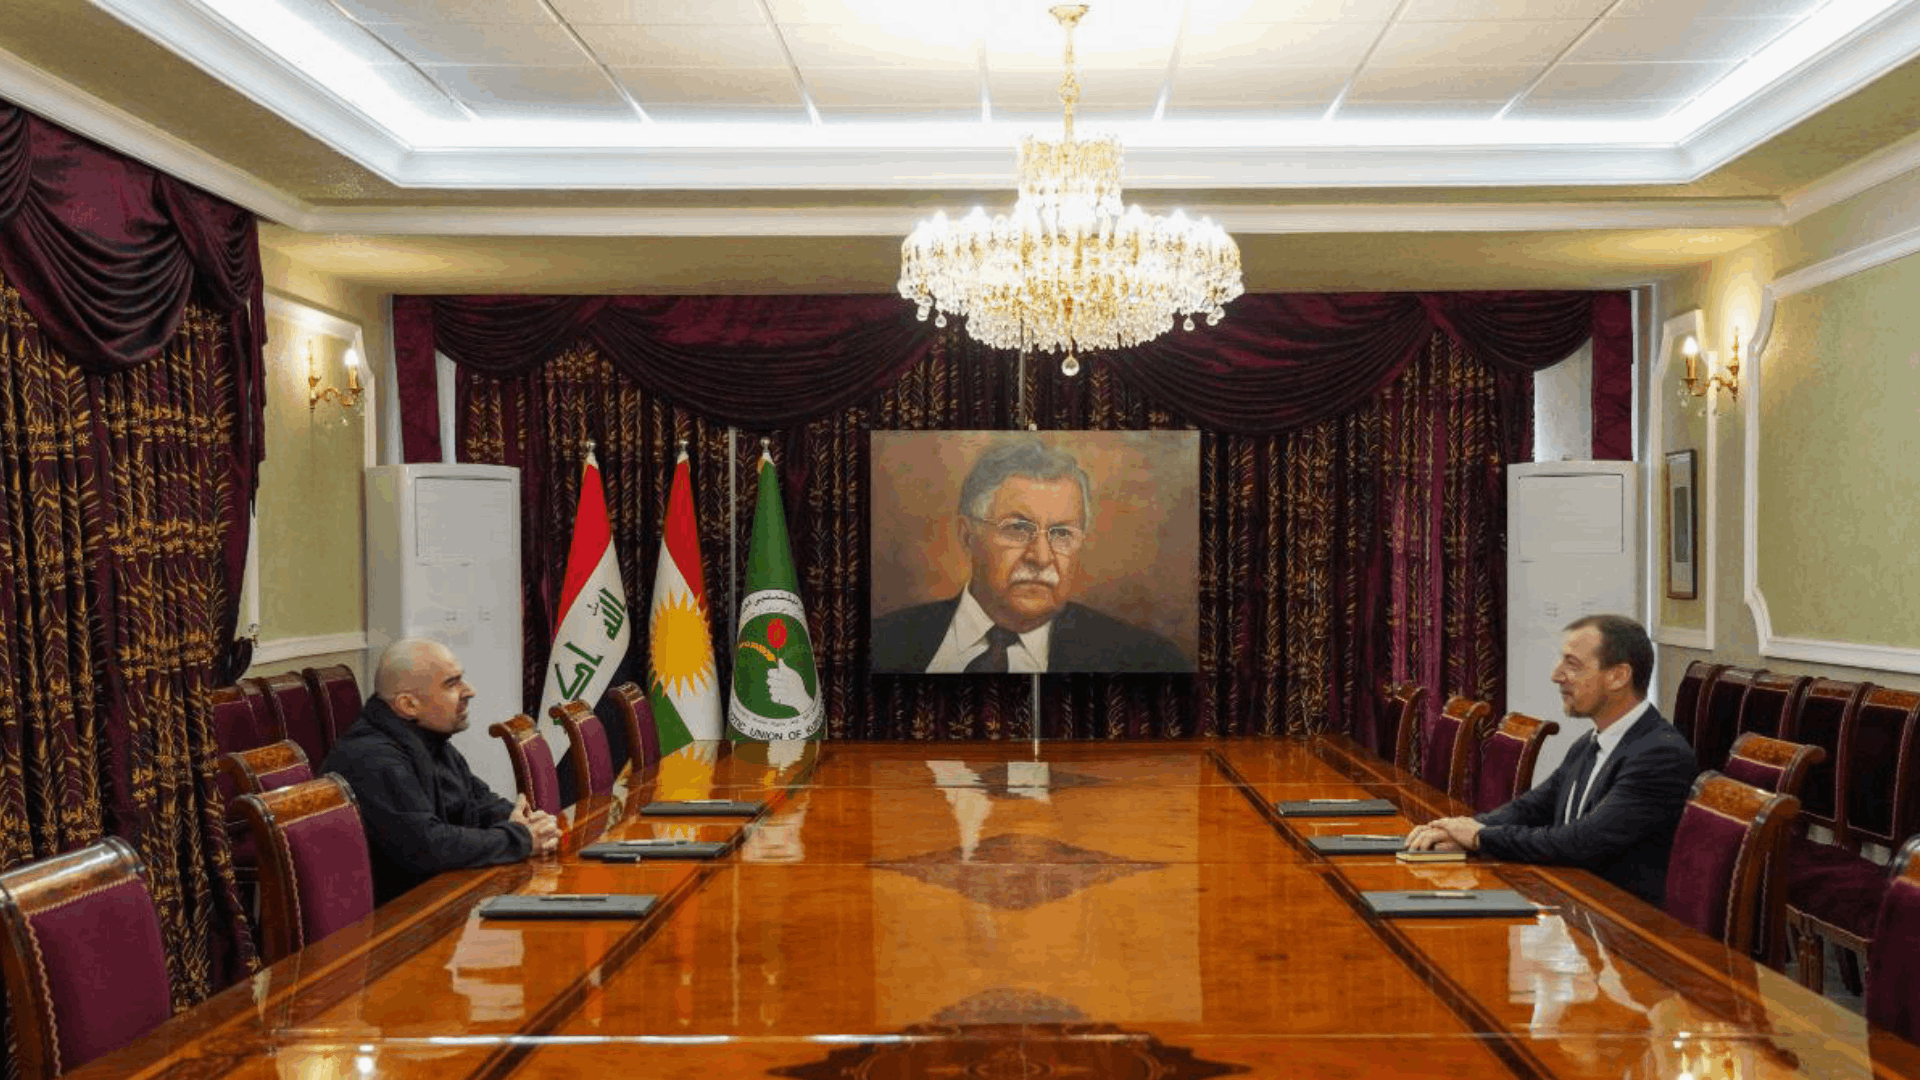  PUK President on the left and French Consul General on the right of the meeting's table.